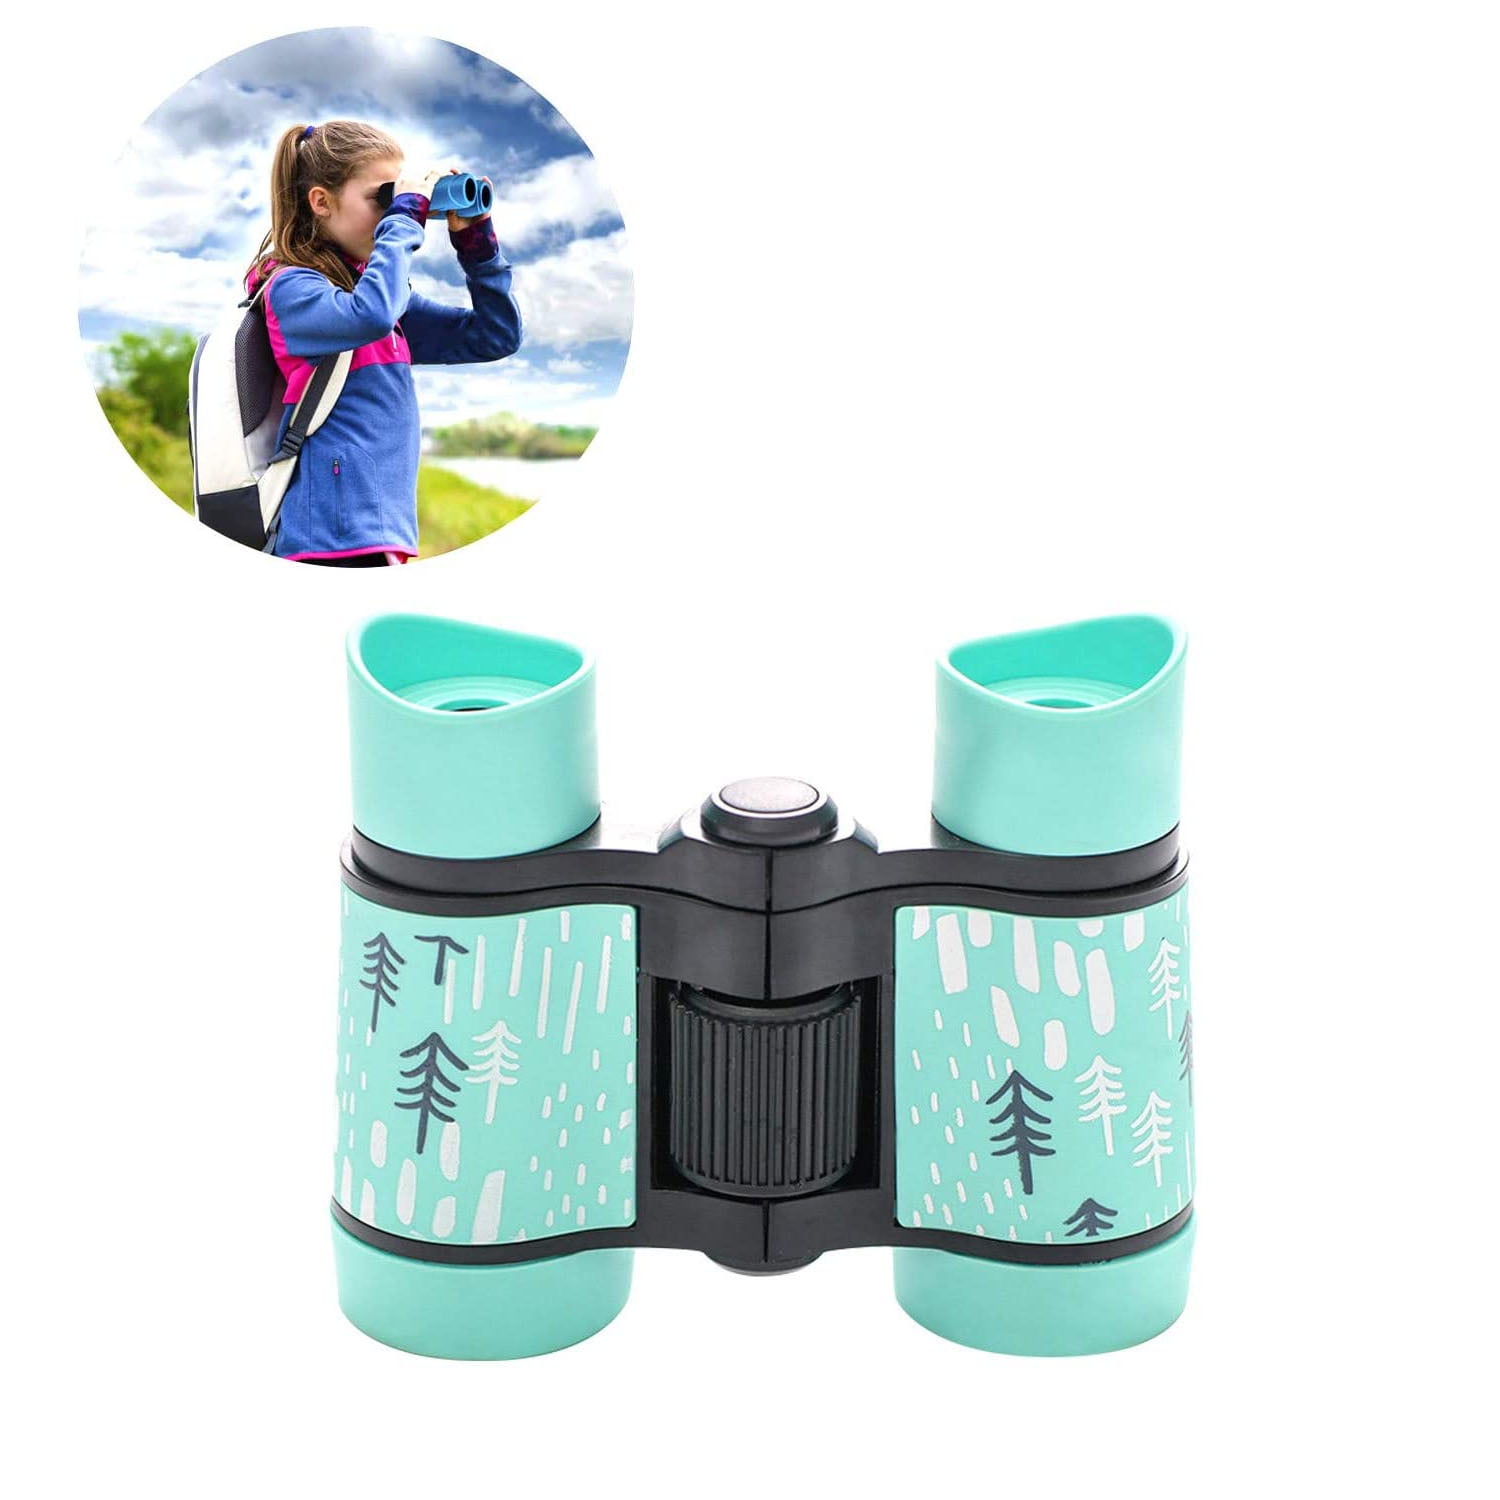 Gifts for Teen Girls DIMY Shock Proof Compact Binoculars for Kids Gift Ideas for Teen Girls Toys for 3-12 Year Old Girls Purple DL06 